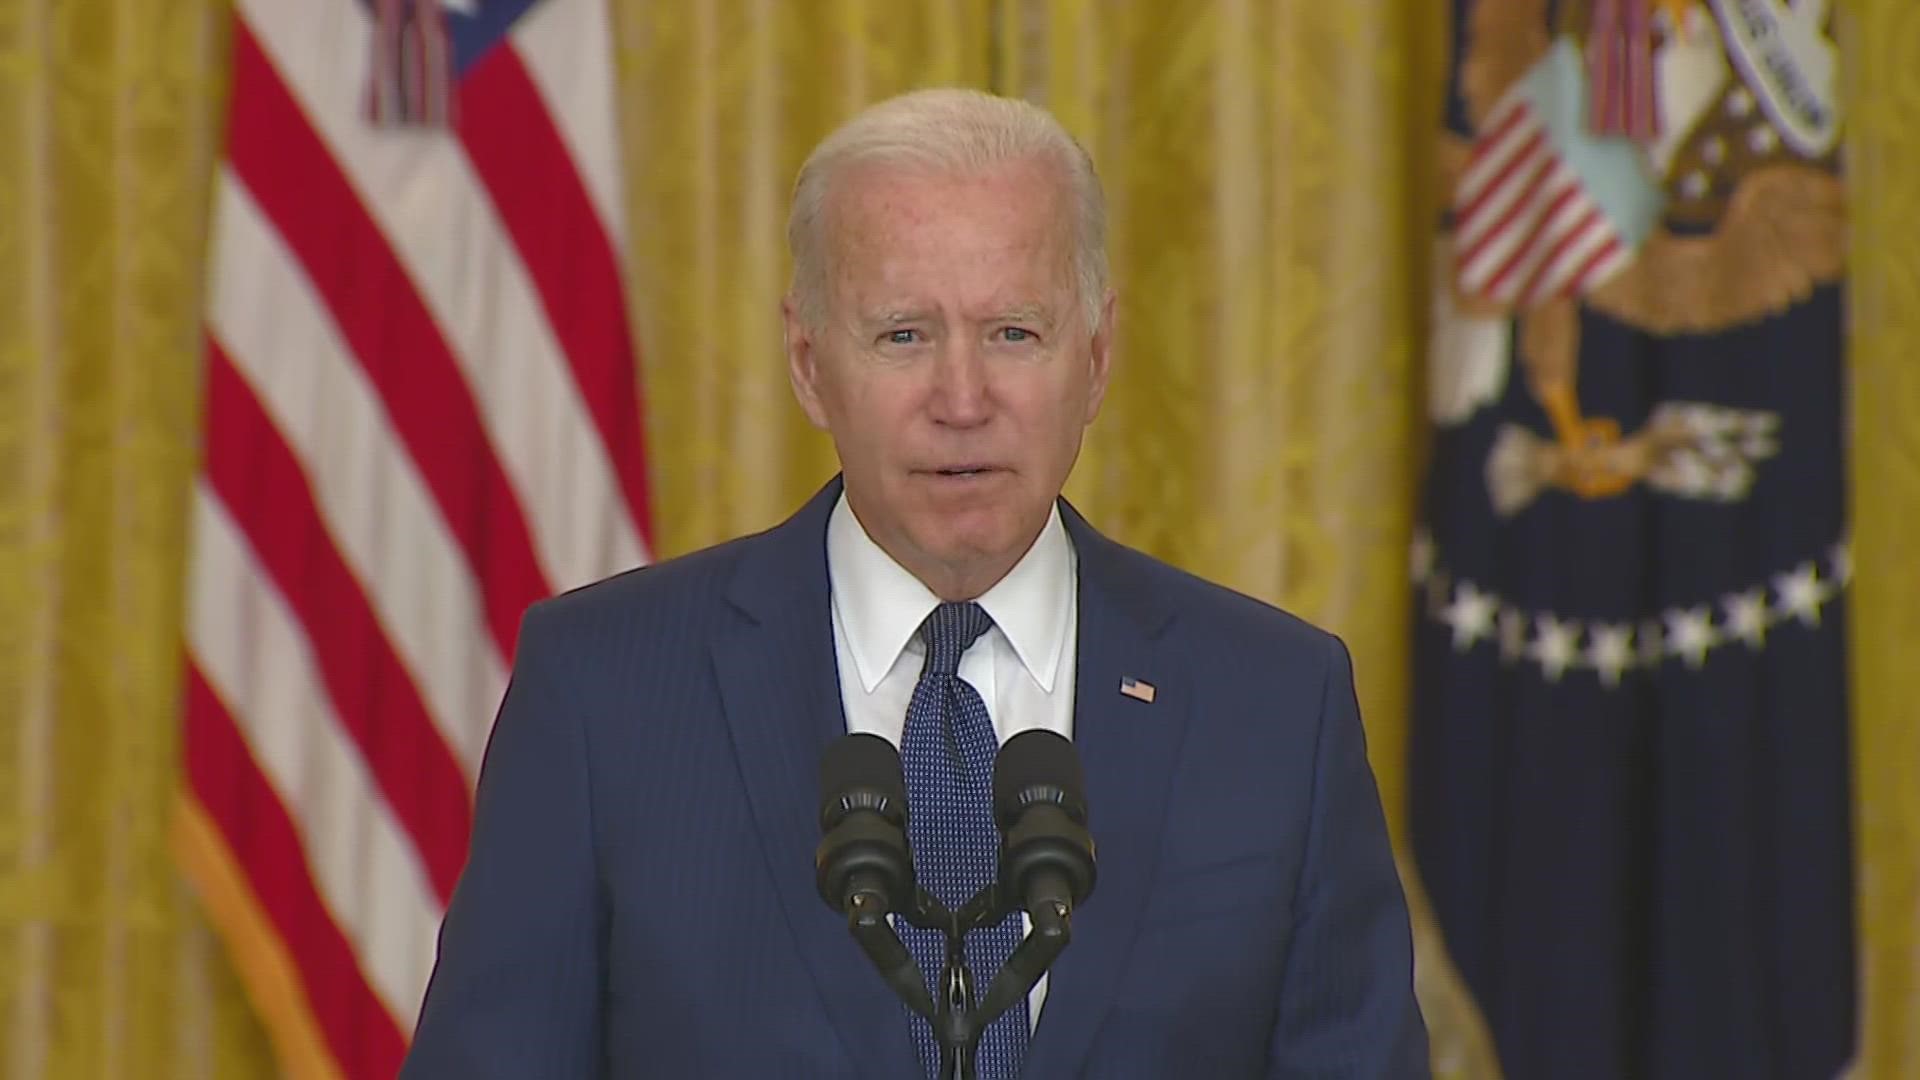 Addressing the public Thursday, President Joe Biden said evacuations in Afghanistan would continue, and retaliation against ISIS would be coming.